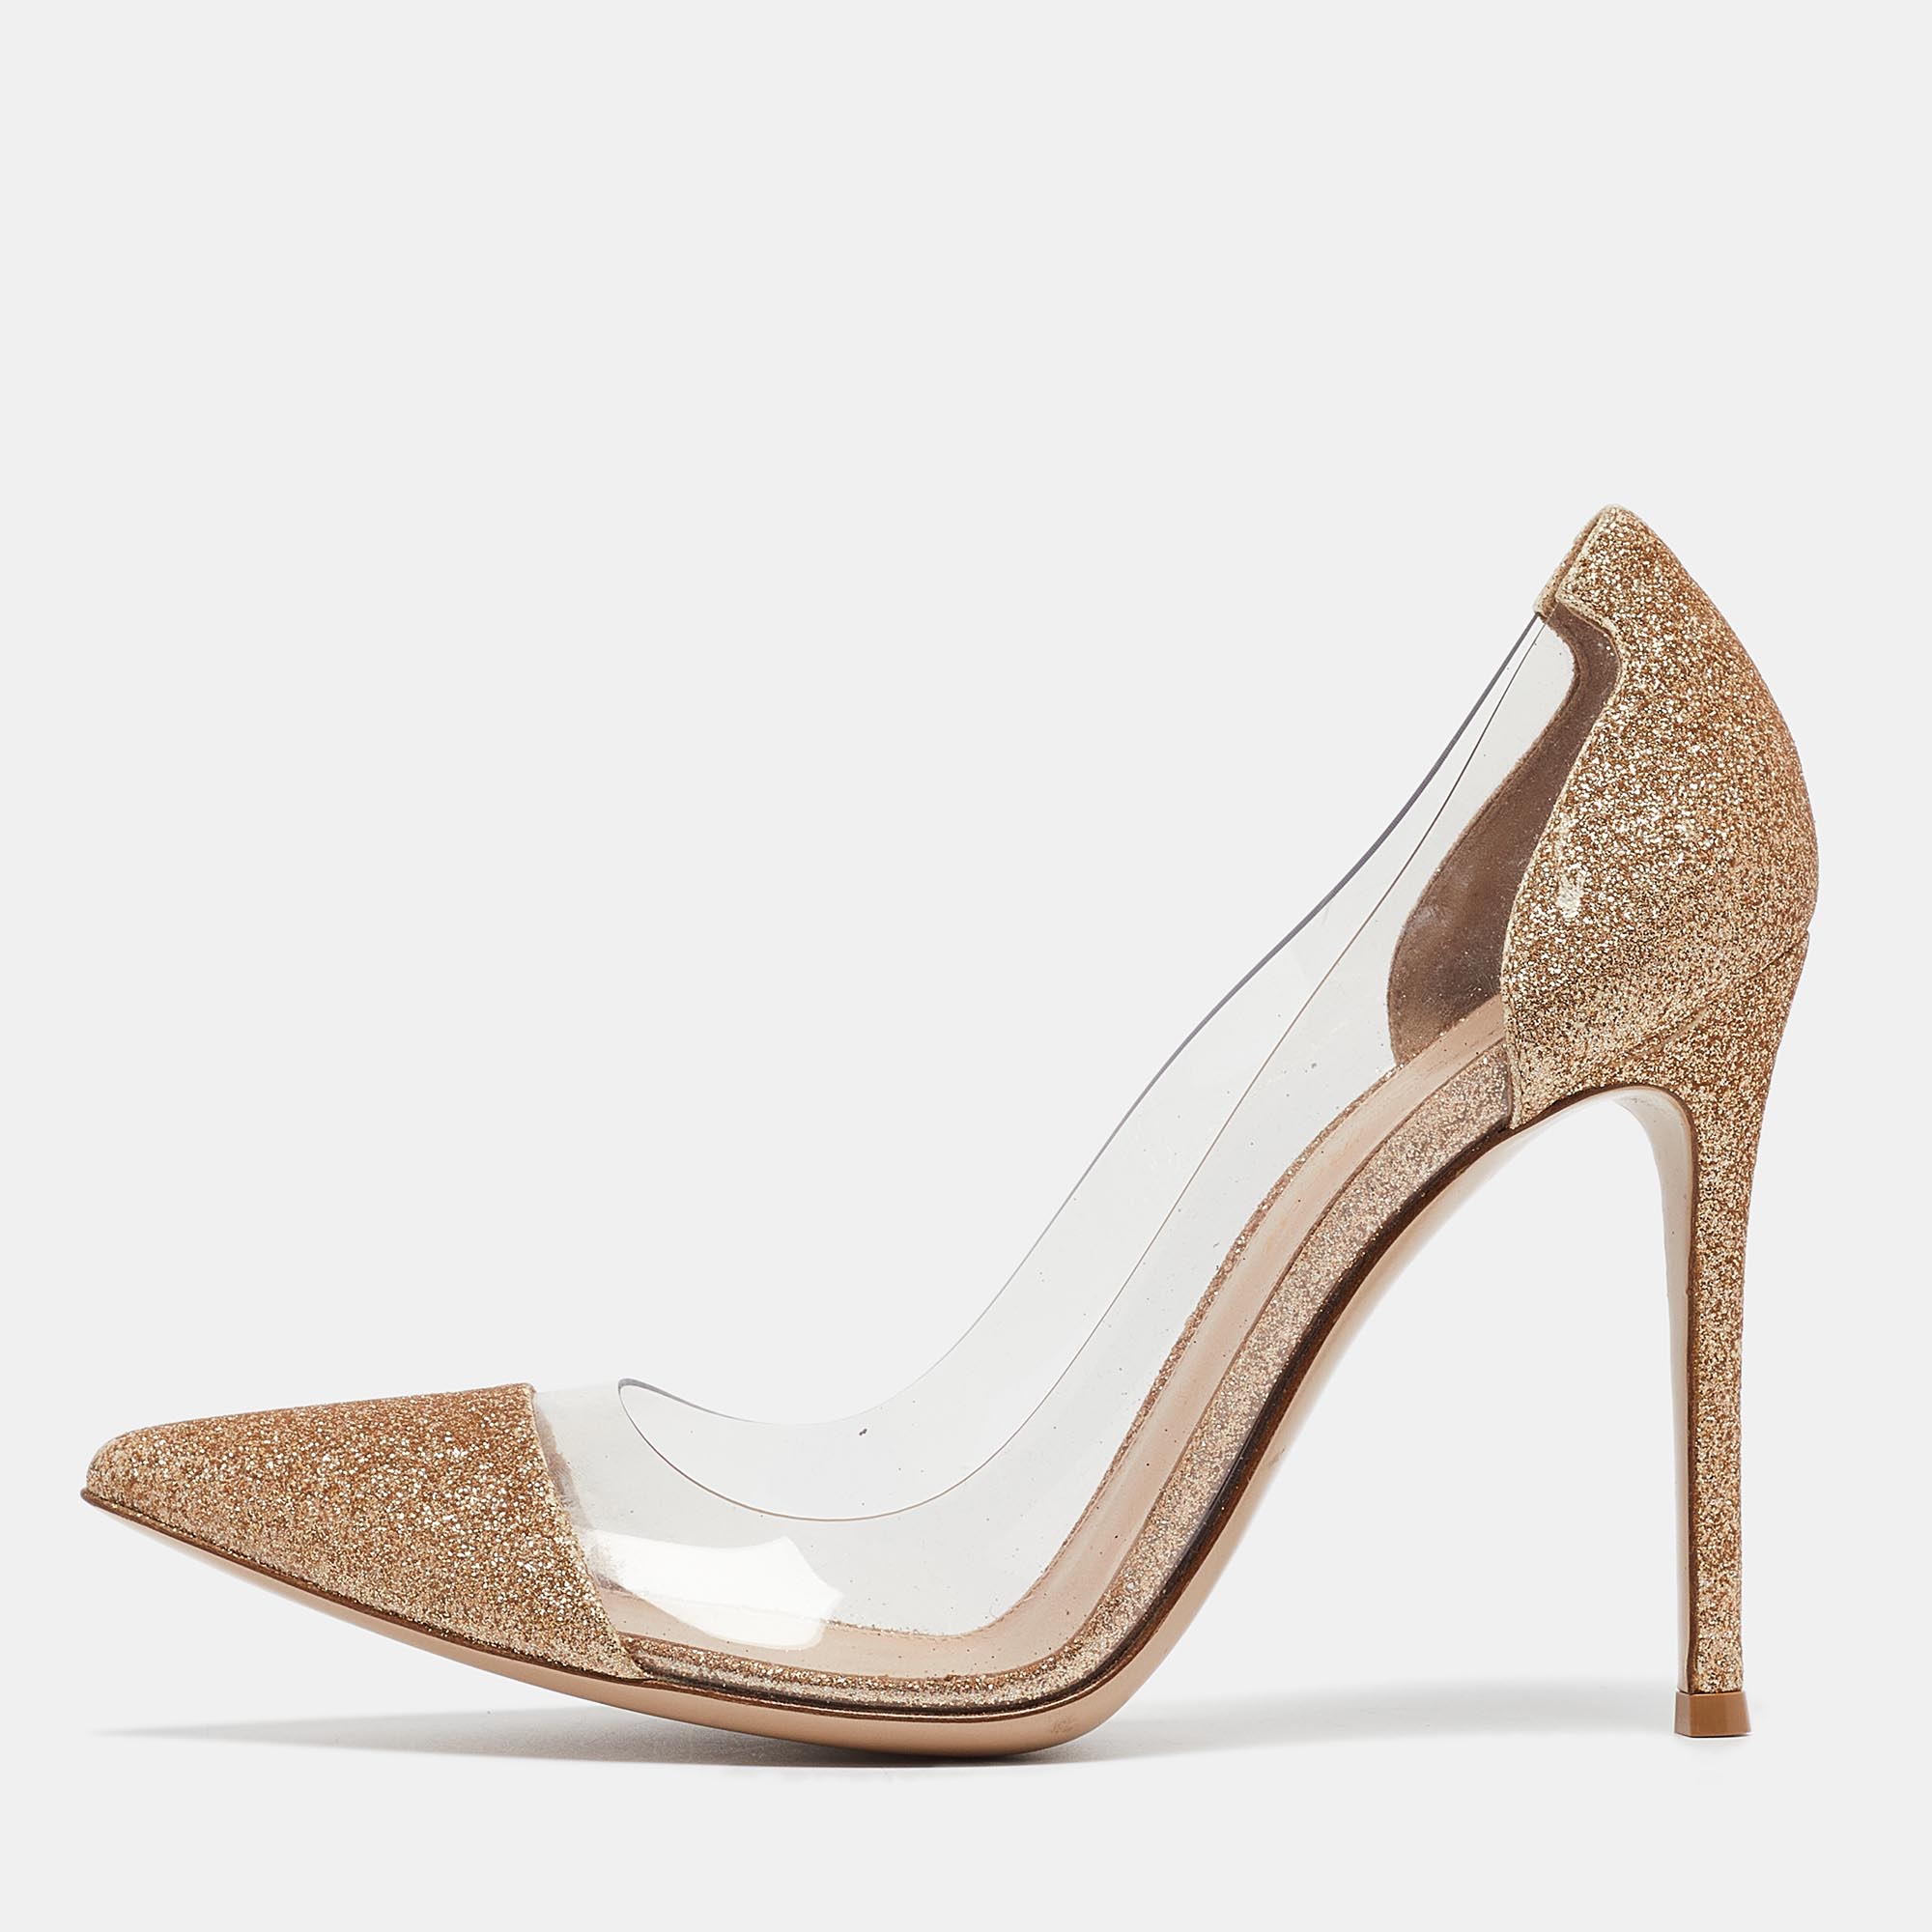 These Plexi pumps from the Italian shoe label Gianvito Rossi are here to make you fall in love with them. Perfectly crafted from glitter and PVC these pumps feature an elegant silhouette. They flaunt pointed toes 10.5 cm stiletto heels and leather lined insoles.